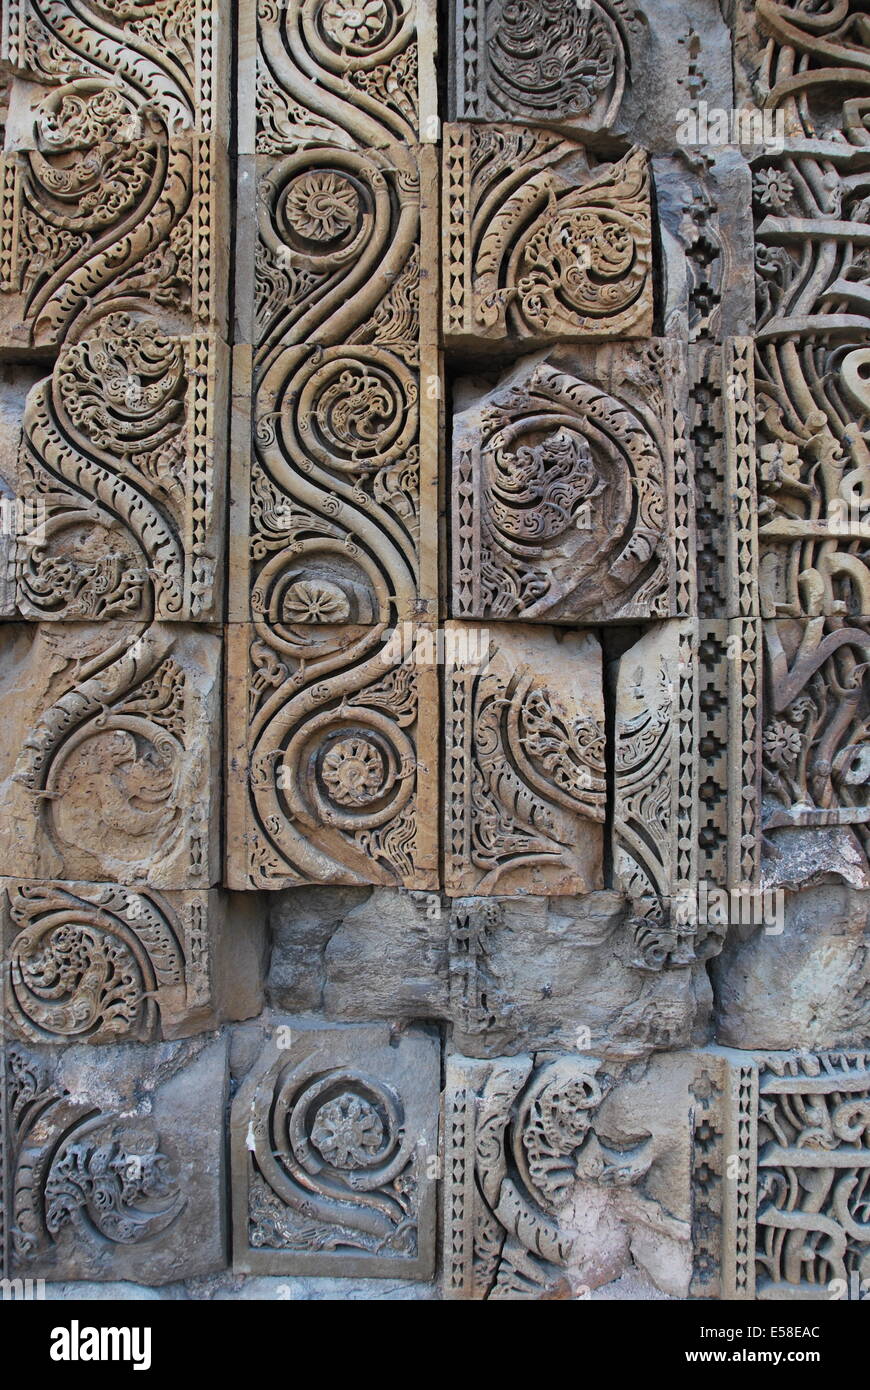 Qutab Minar. Mosque,.Delhi,.India.  The mosque with Hindu ornamentation stolen from Hindu temples. Sandstone carving detail. Stock Photo